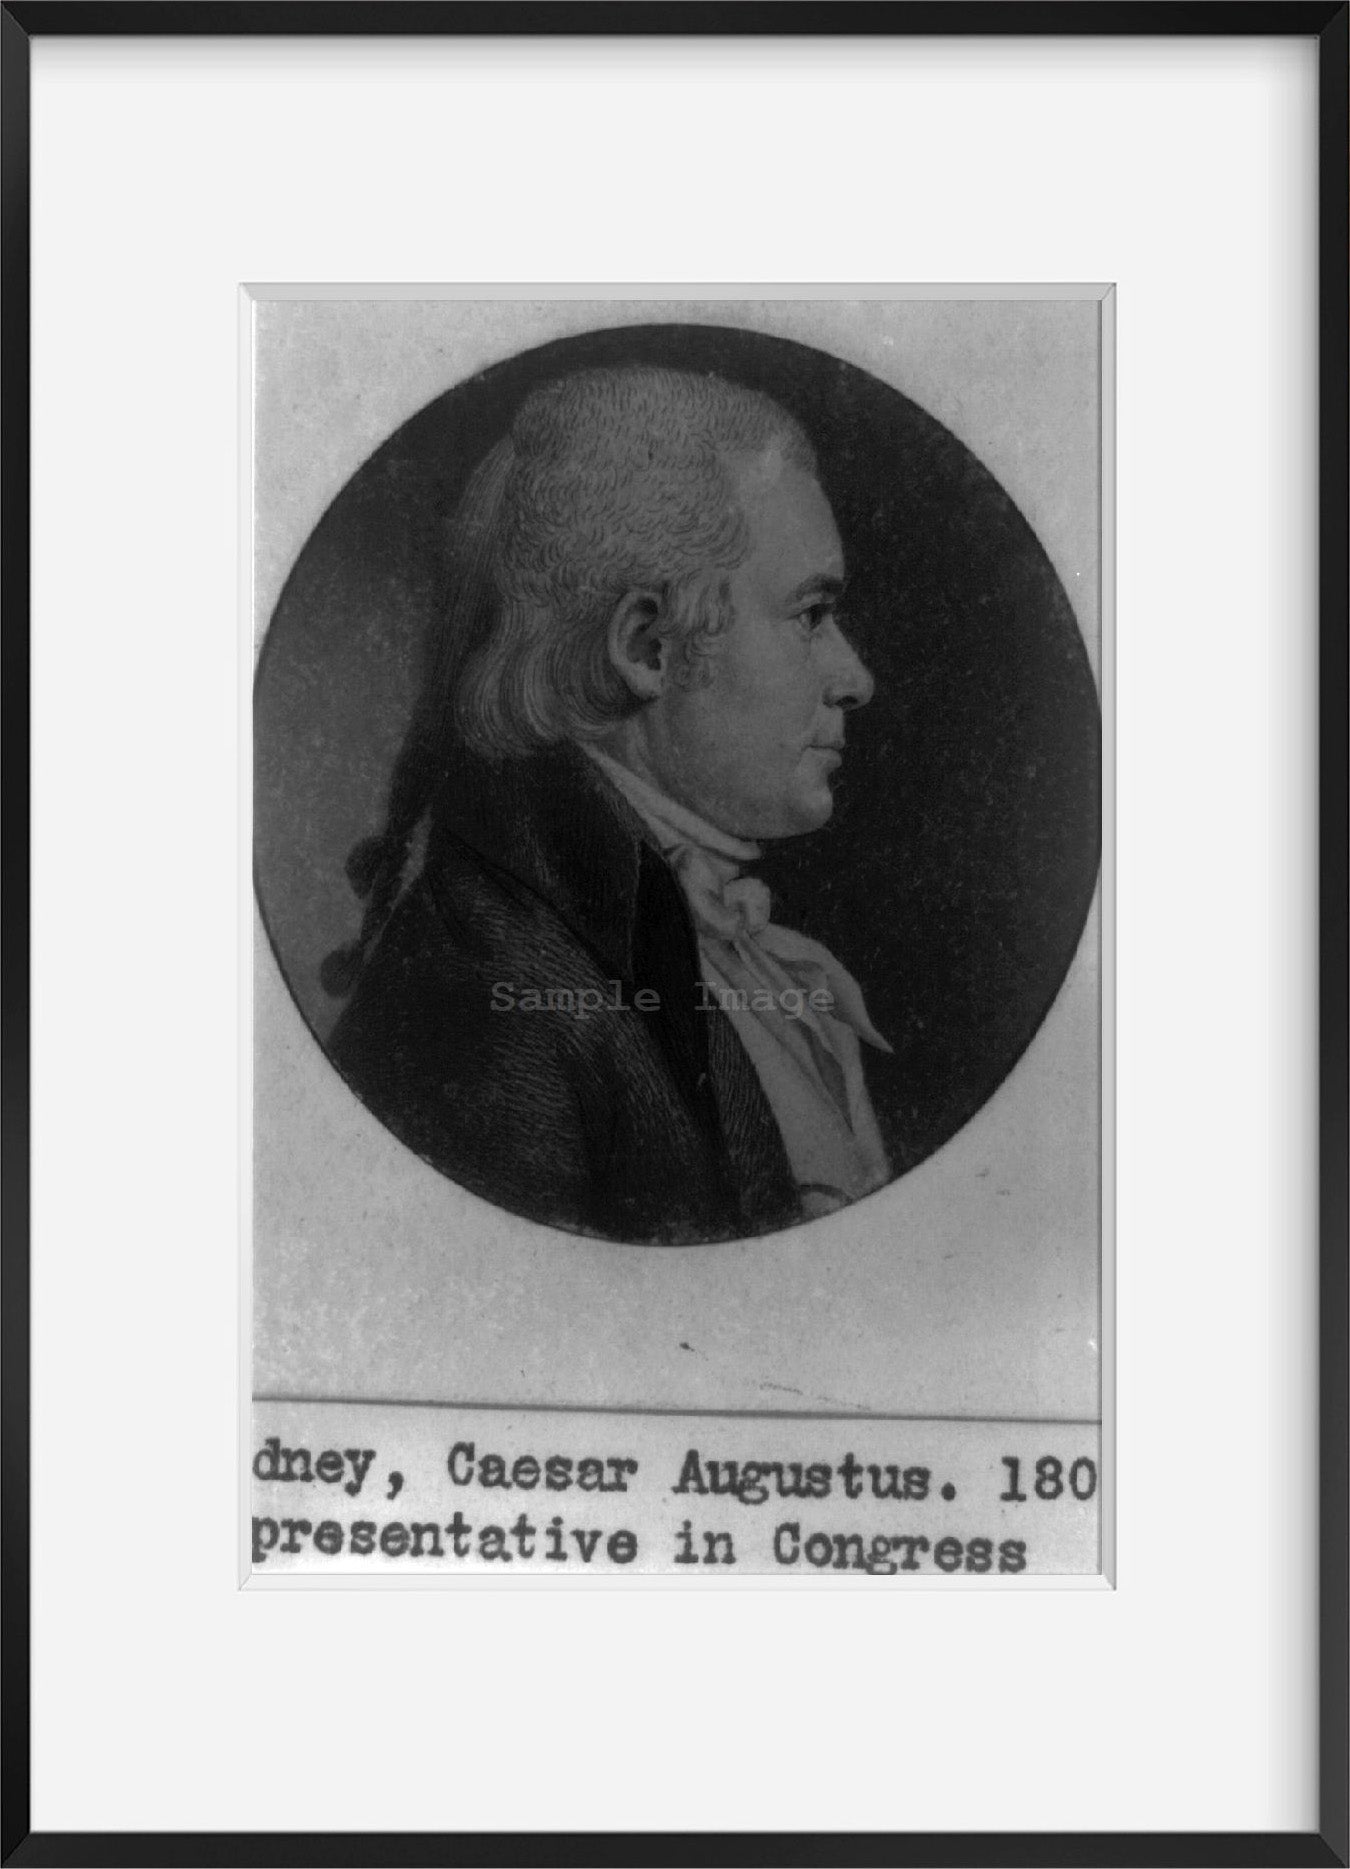 Vintage photograph: Caesar Rodney Summary: Not the Signer of the Declaration of